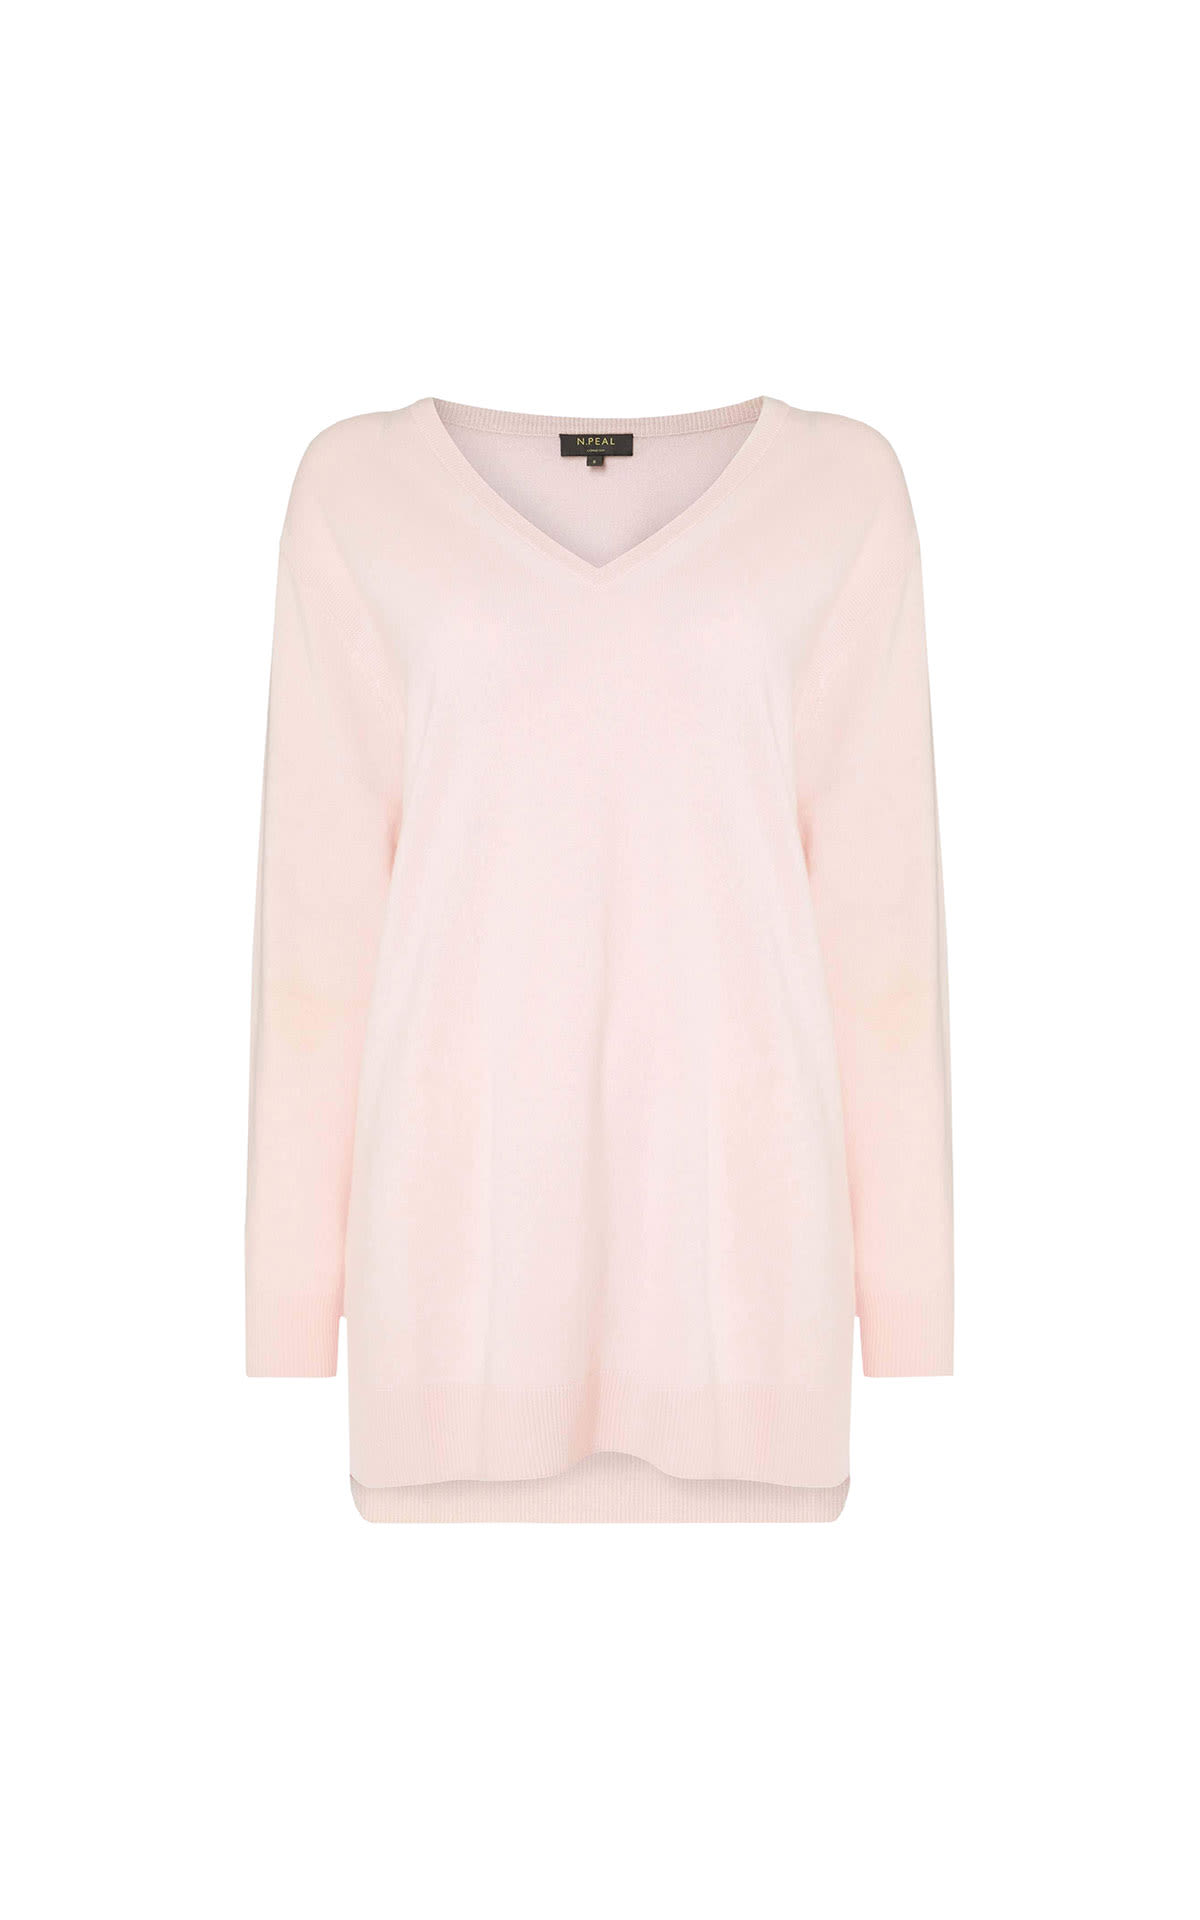 N.Peal Ladies v-neck longline sweater from Bicester Village